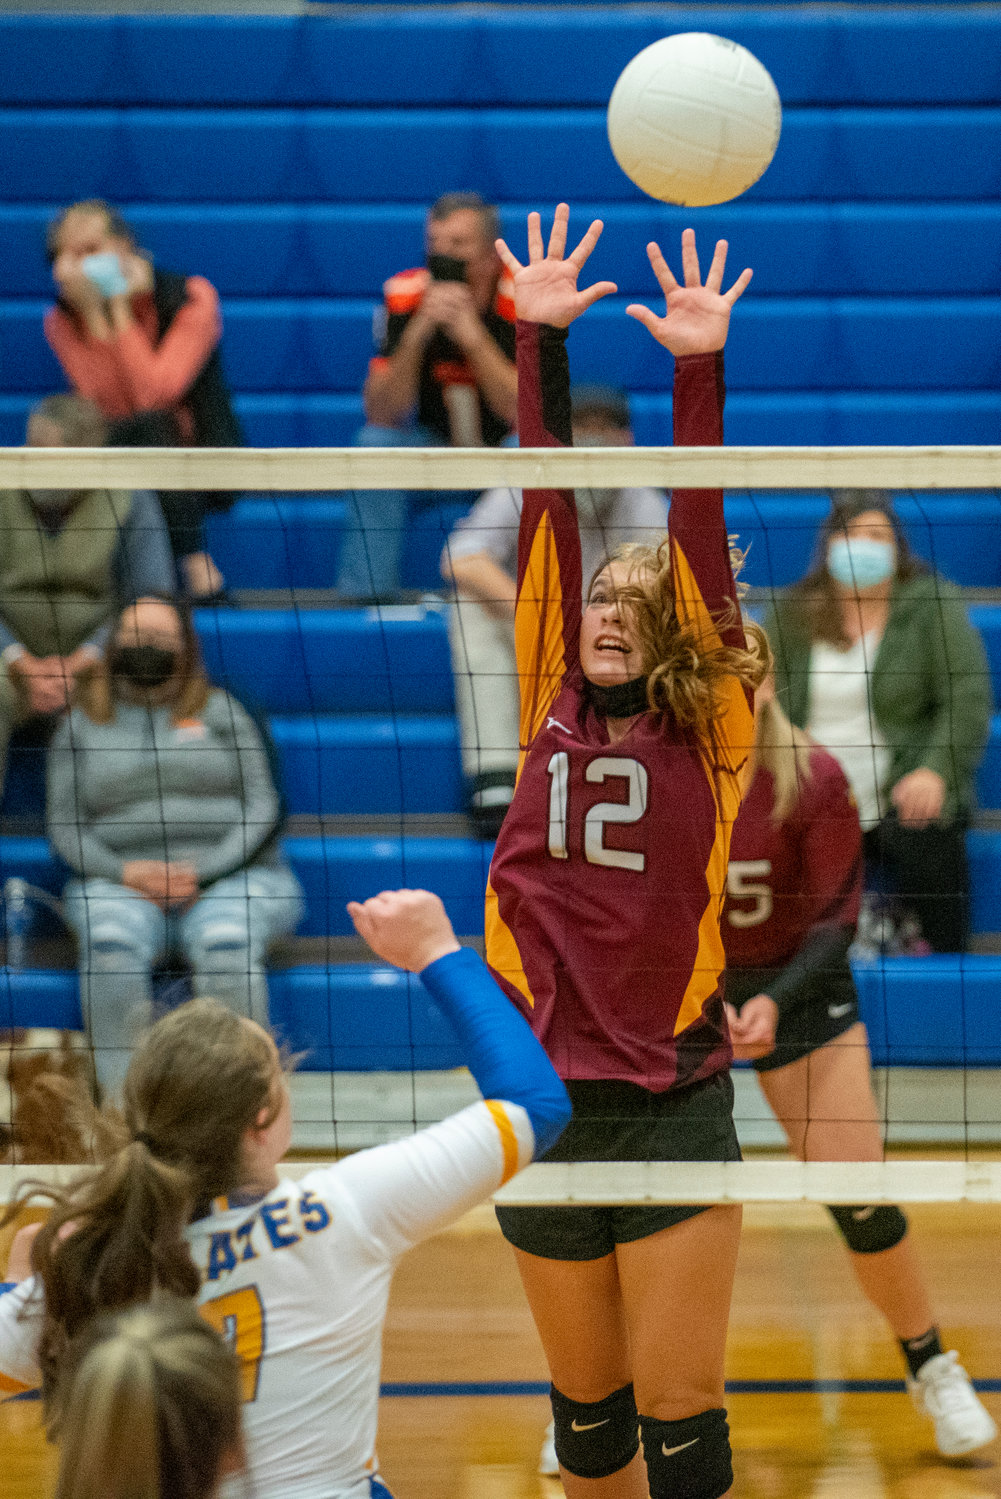 A Winlock player goes for a block against Adna on Saturday.